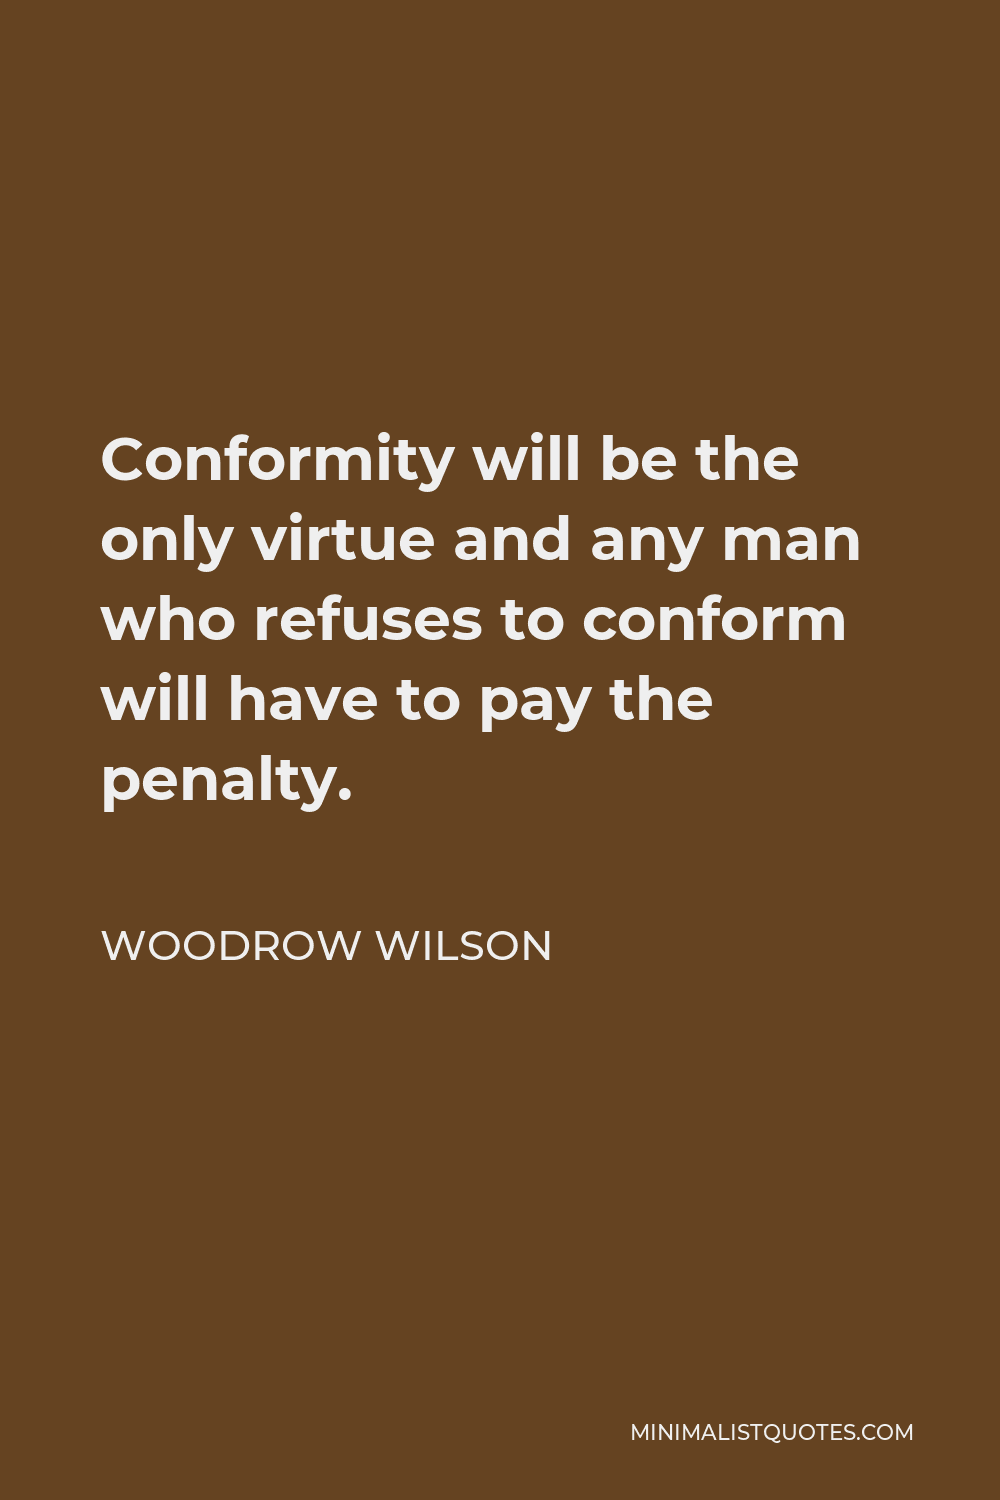 Woodrow Wilson Quote - Conformity will be the only virtue and any man who refuses to conform will have to pay the penalty.